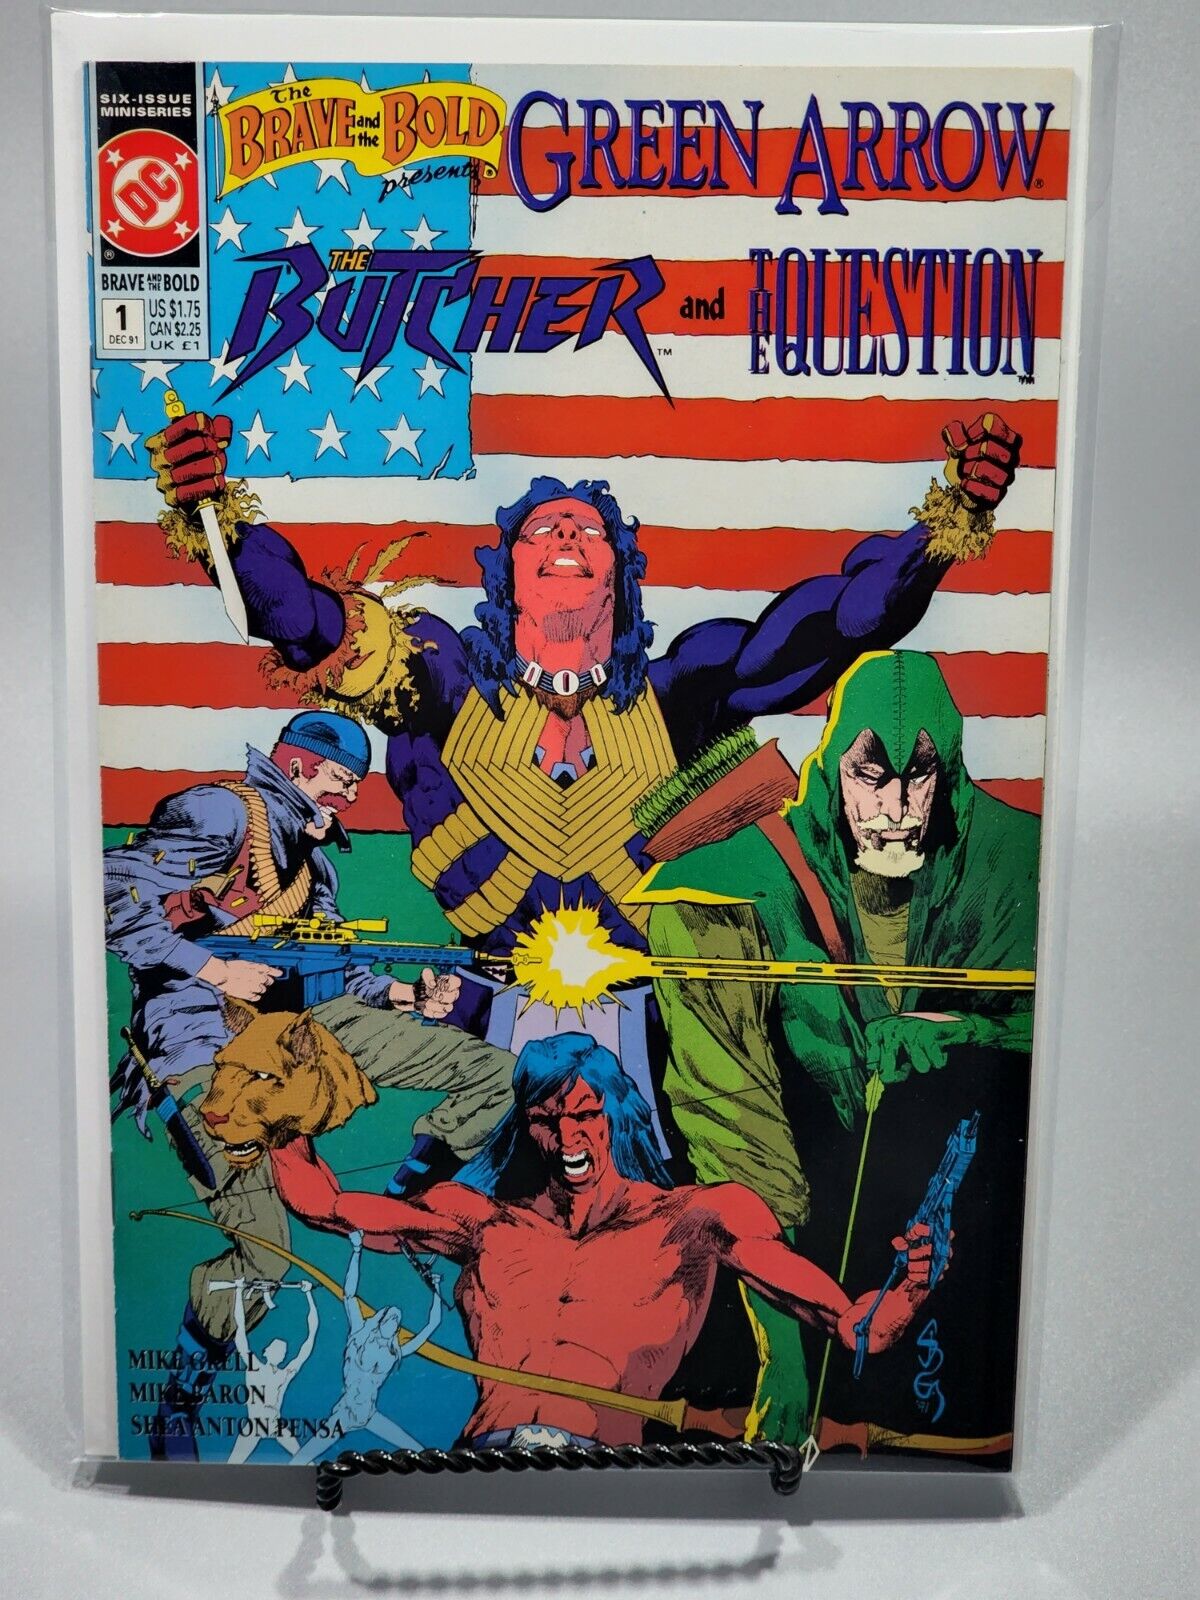 The Brave and the Bold #1 Green Arrow The Butcher The Question 1991 DC VF 8.0